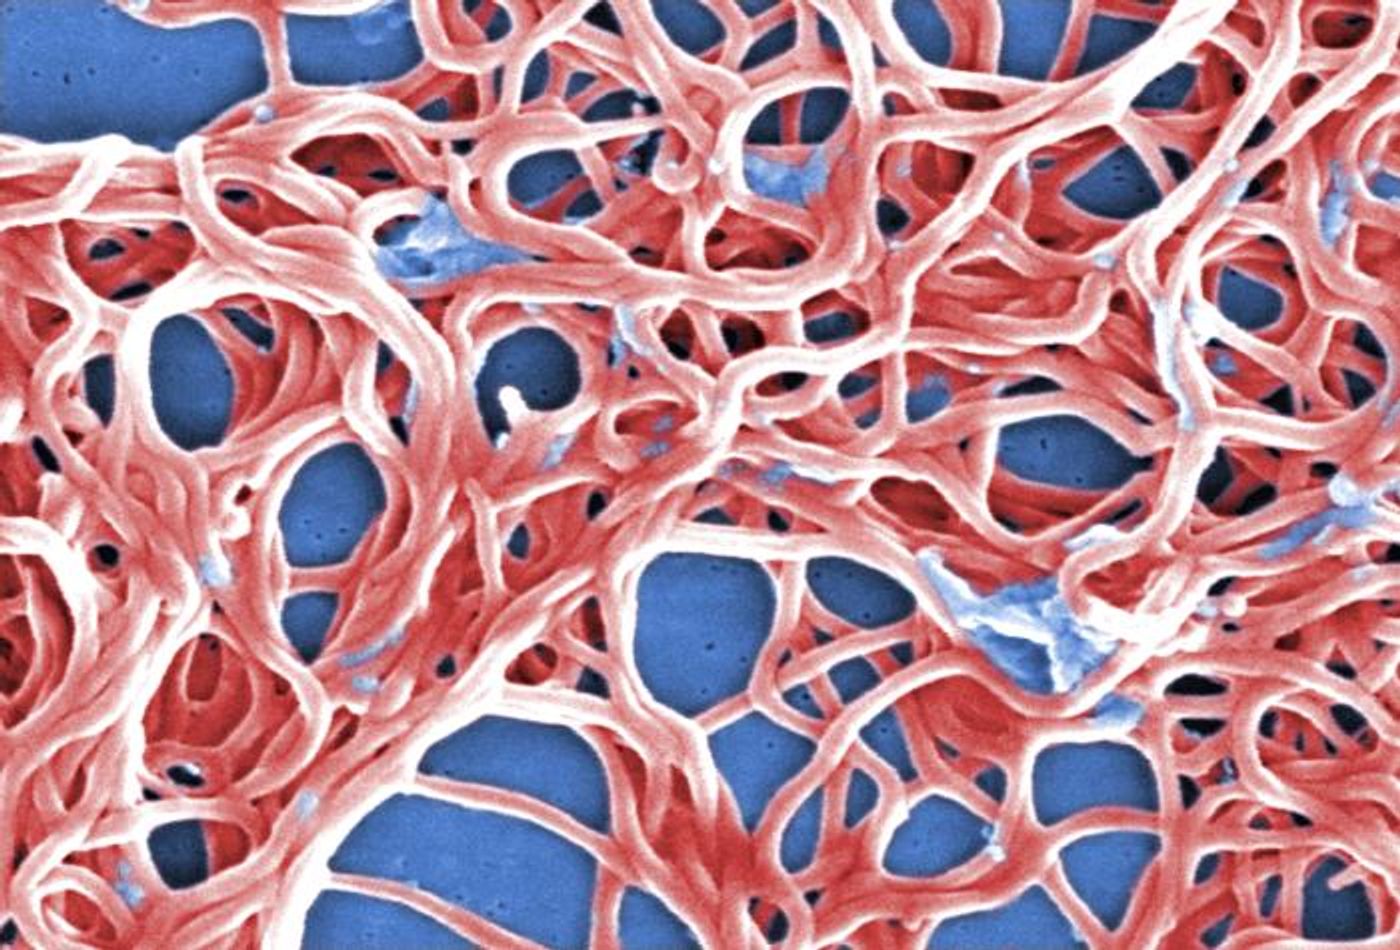 A colorized SEM image depicts of numerous Borrelia burgdorferi bacteria from a pure culture. This pathogenic organism causes Lyme disease, transmitted to humans by way of a tick bite. / Credit: CDC/ Claudia Molins